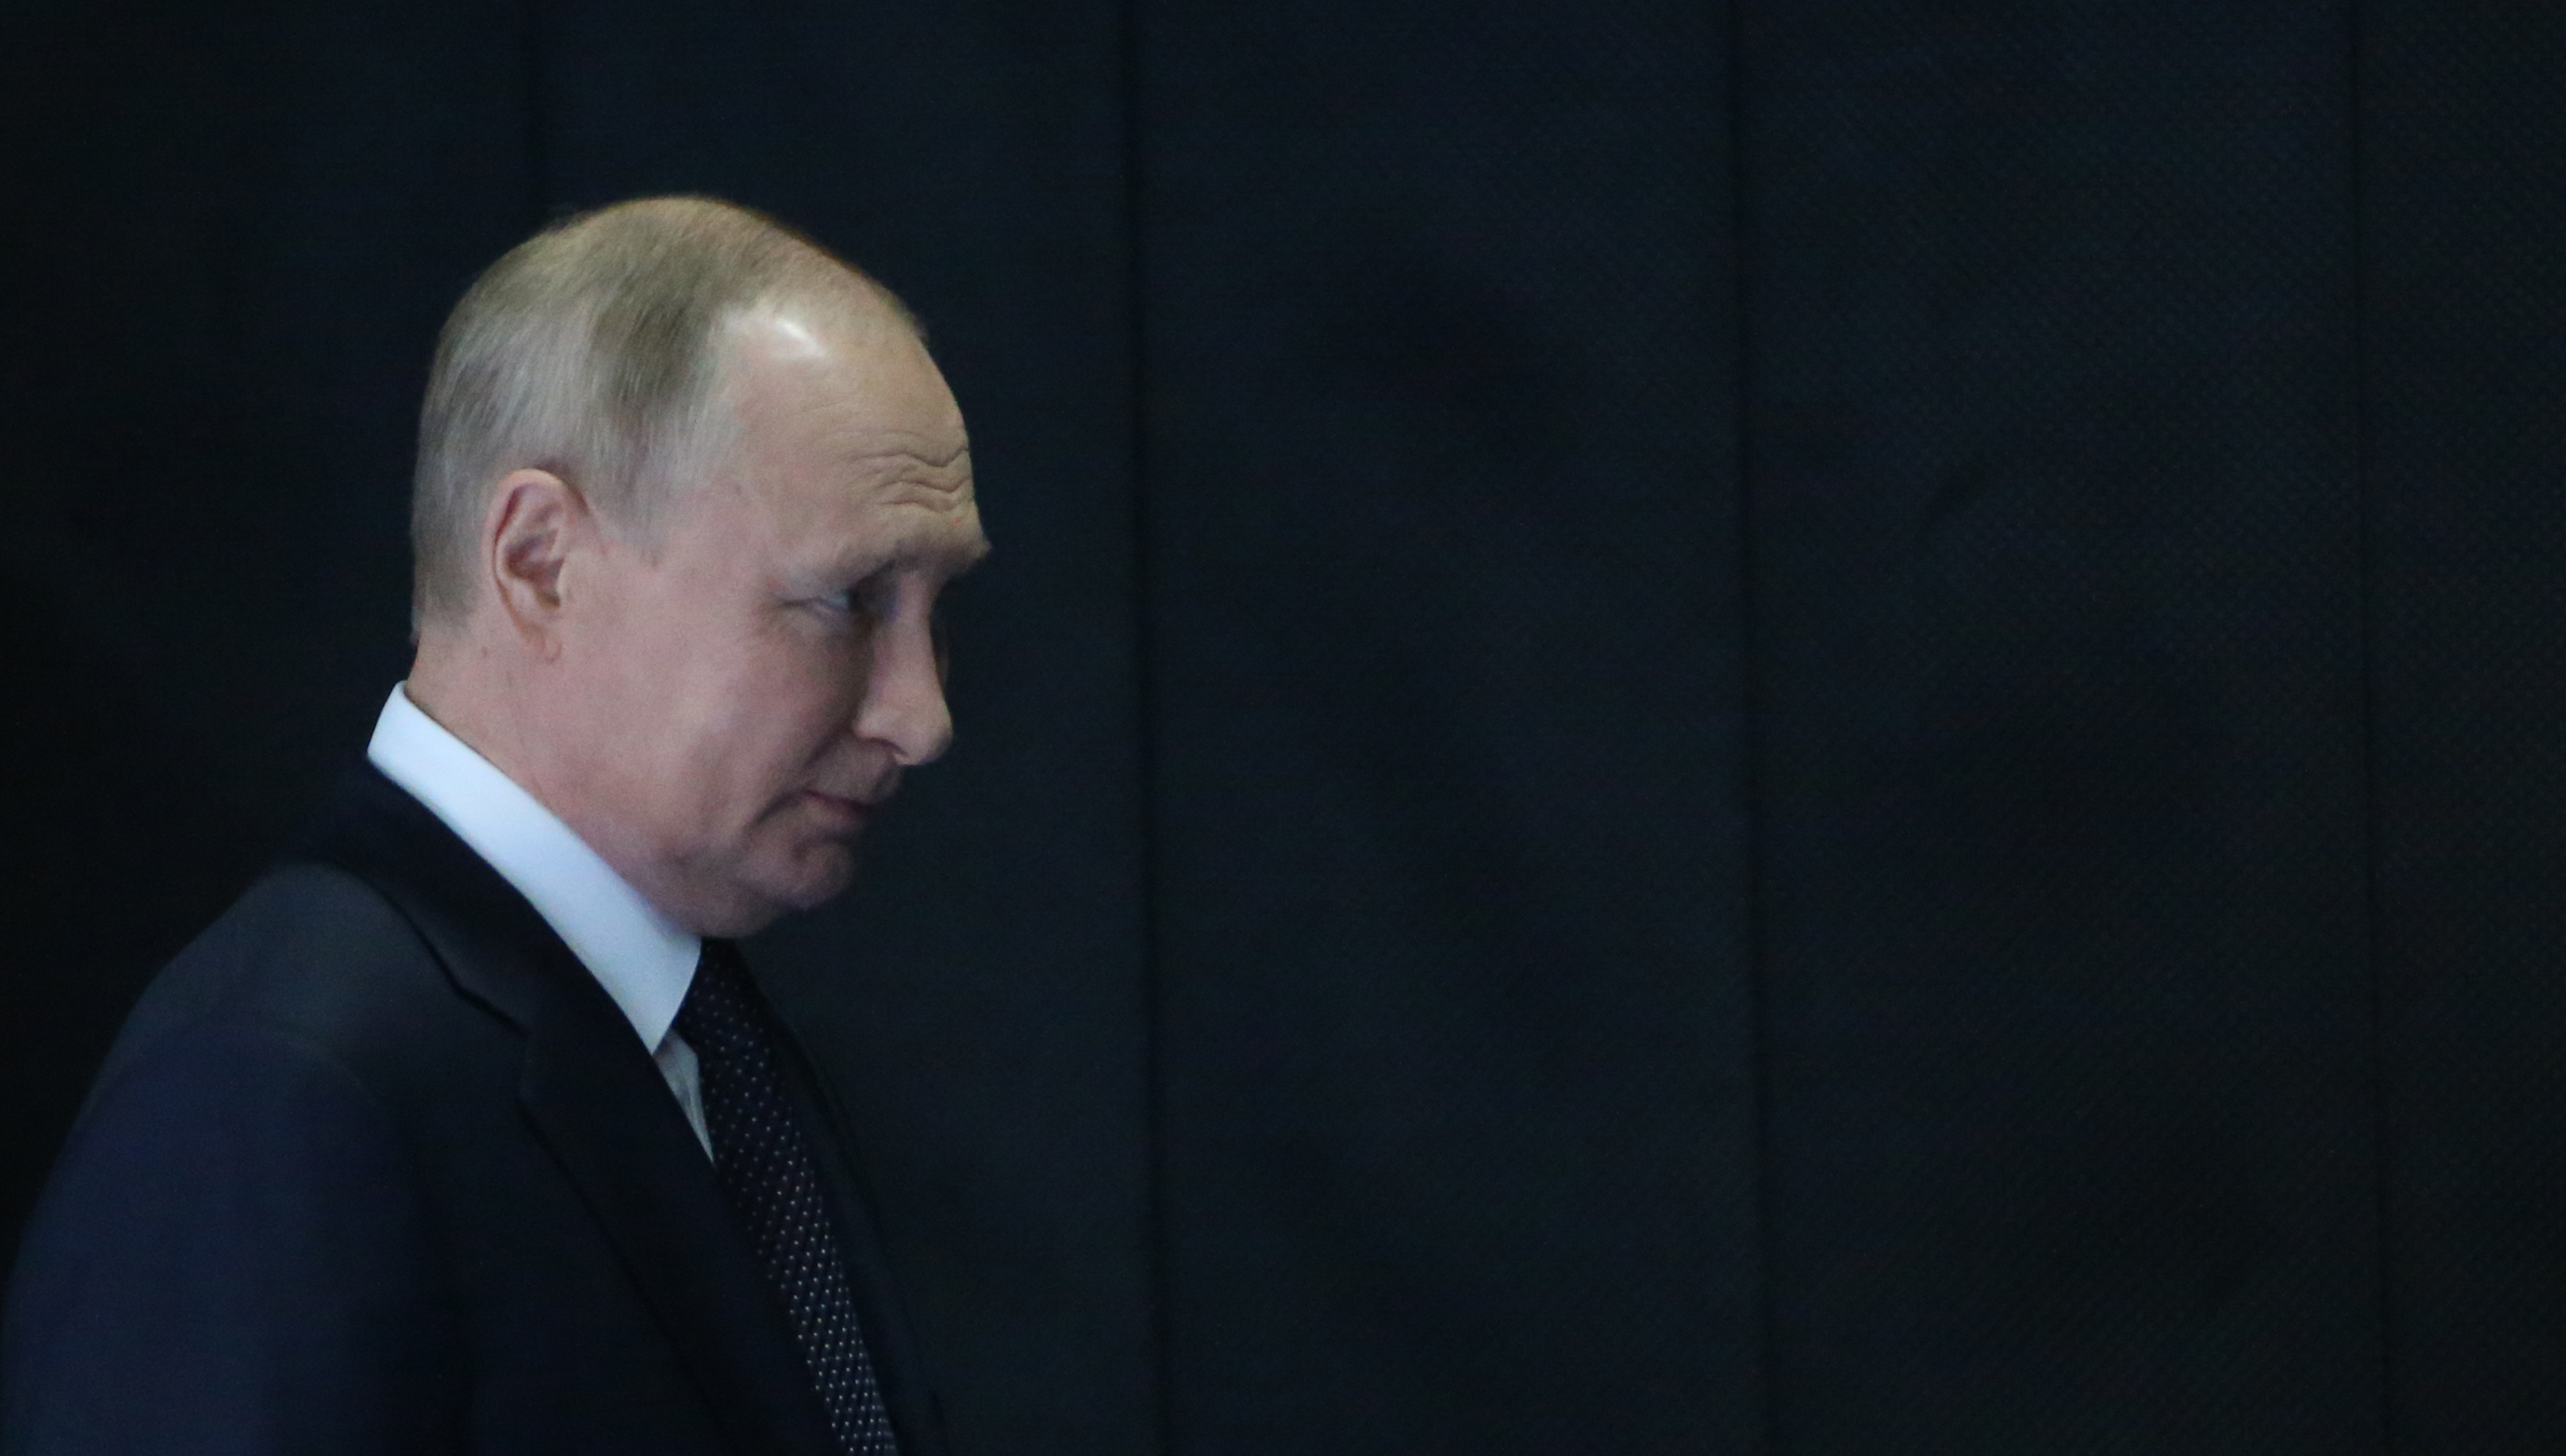 For Vladimir Putin, This Is the Beginning of the End